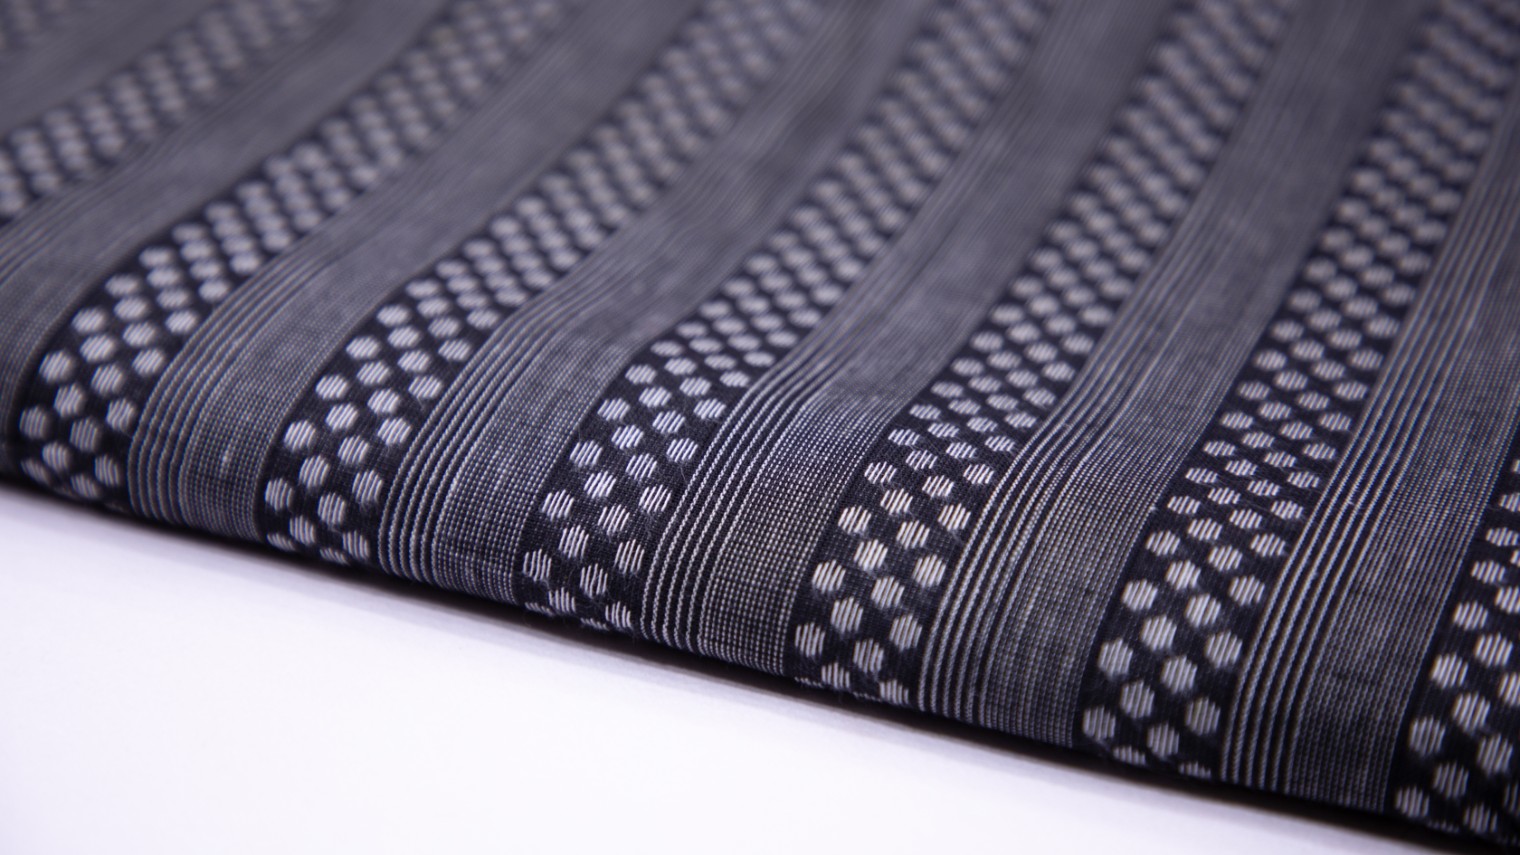 COIL BLACK & GREY COLOR SOUTH COTTON HANDLOOM STRIPES WEAVE FABRIC - 4238